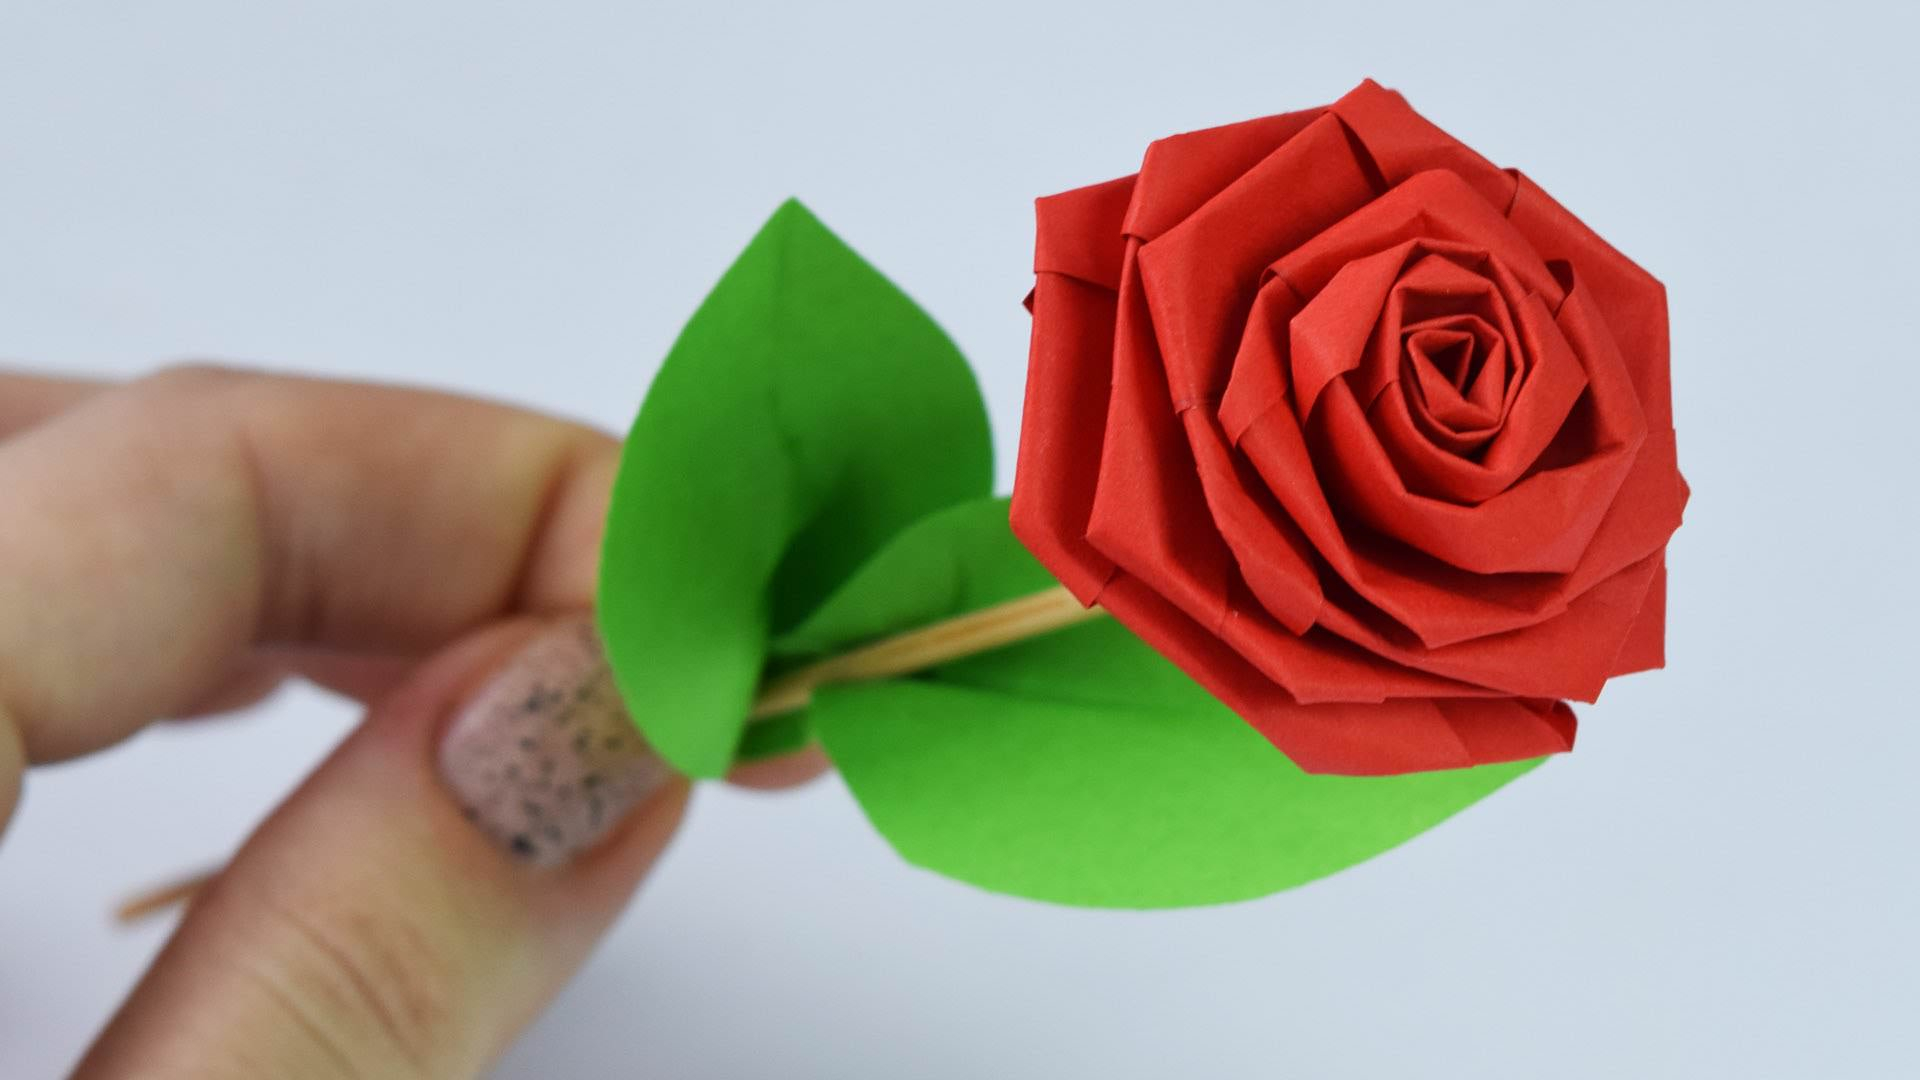 How To Do Origami Rose Origami Rose How To Make A Origami Rose Easy Step Step